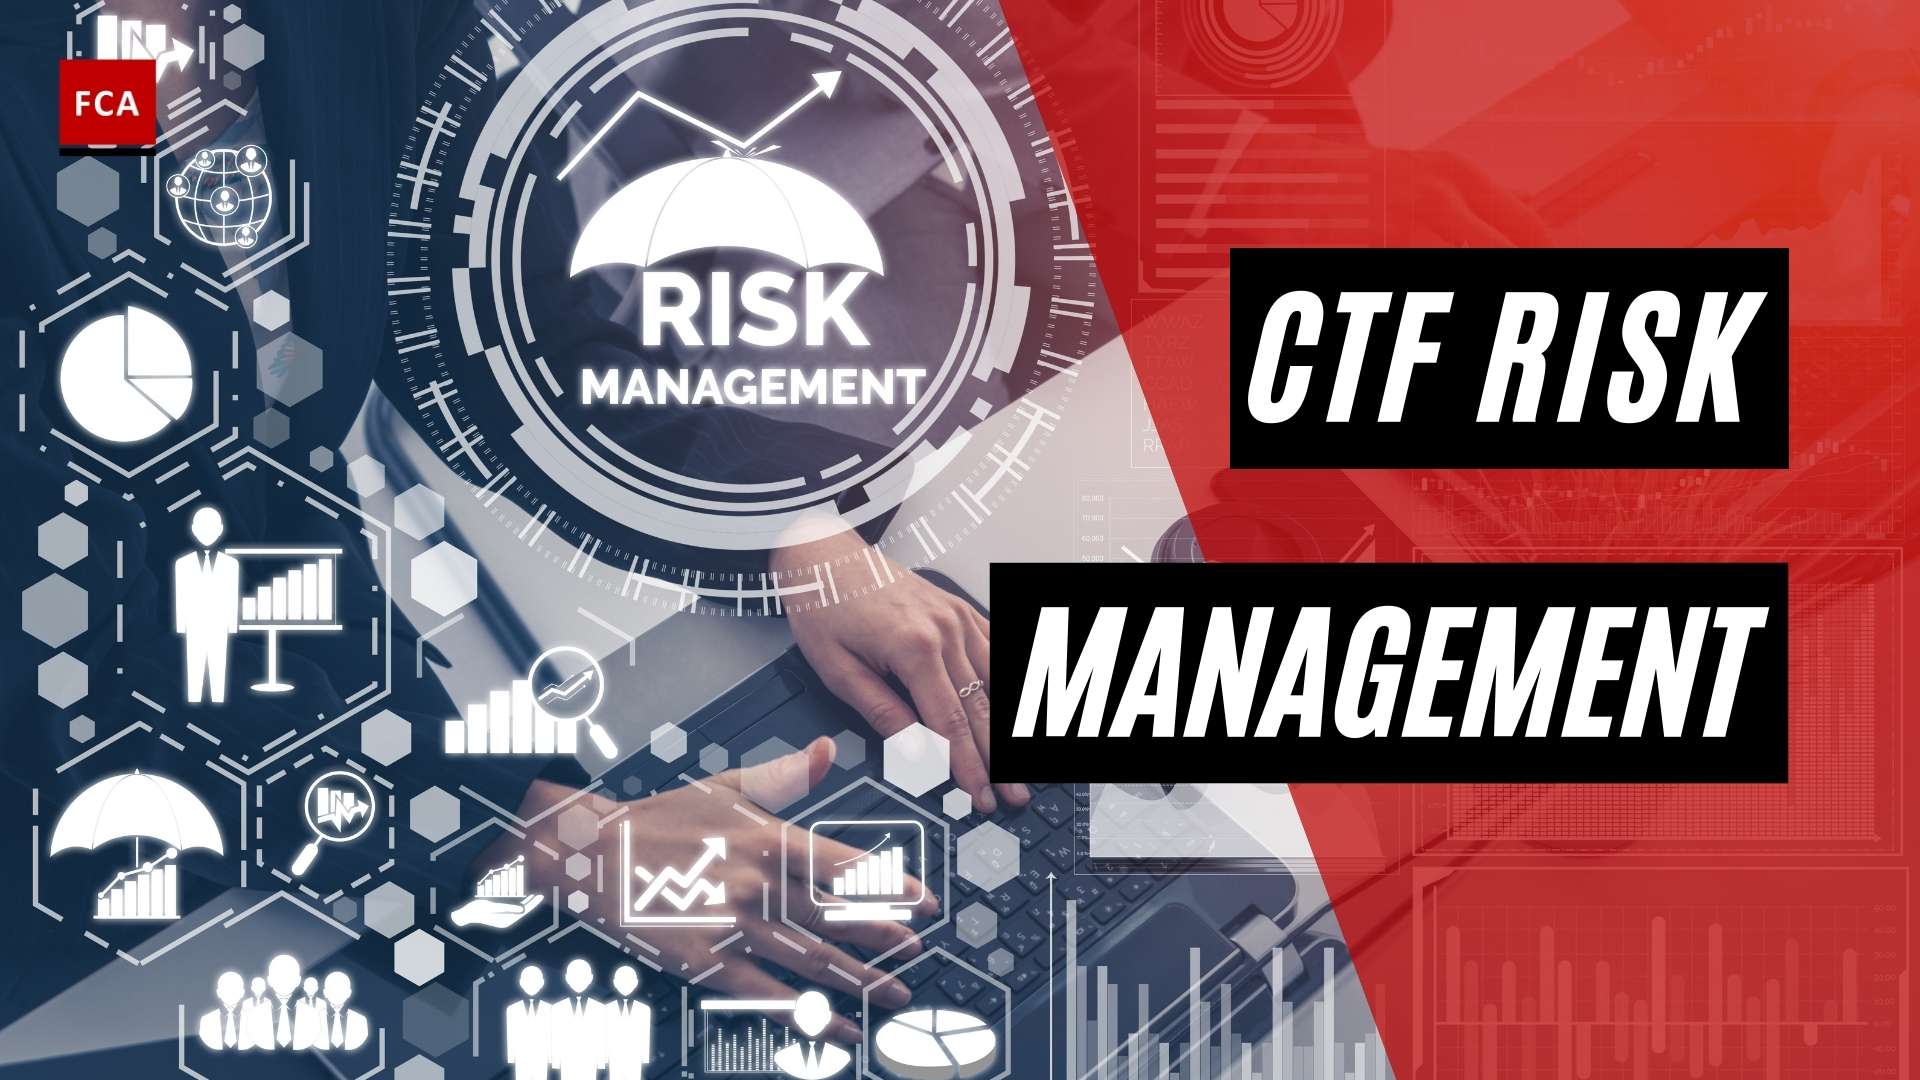 Ctf Risk Management - Featured Image